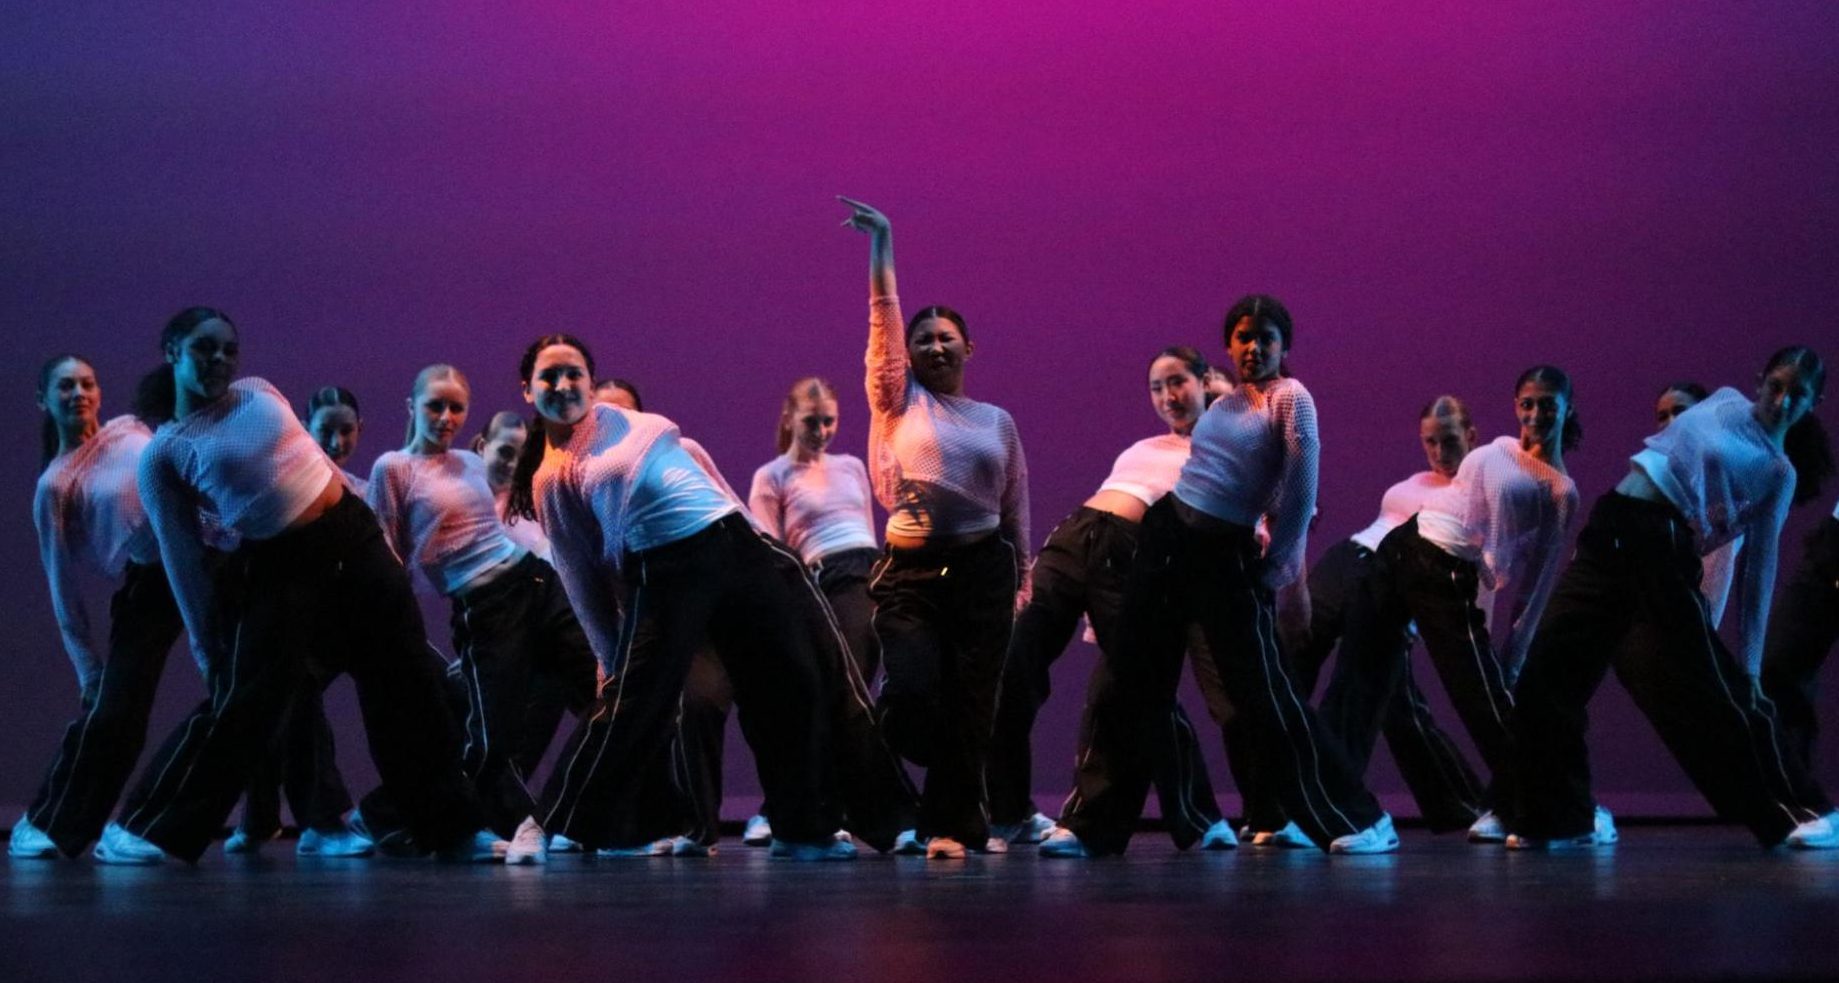 Advanced Dance and Dance Production, as well the Ladera Vista dance team and OC Hip-Hop group G-Train, will be performing in the annual Fall Dance concert tonight and Friday at 7 p.m. in the auditorium. Tickets are $10 for general admission and $5 for students. Tickets are available at the door or online at fuhs.booktix.com. 